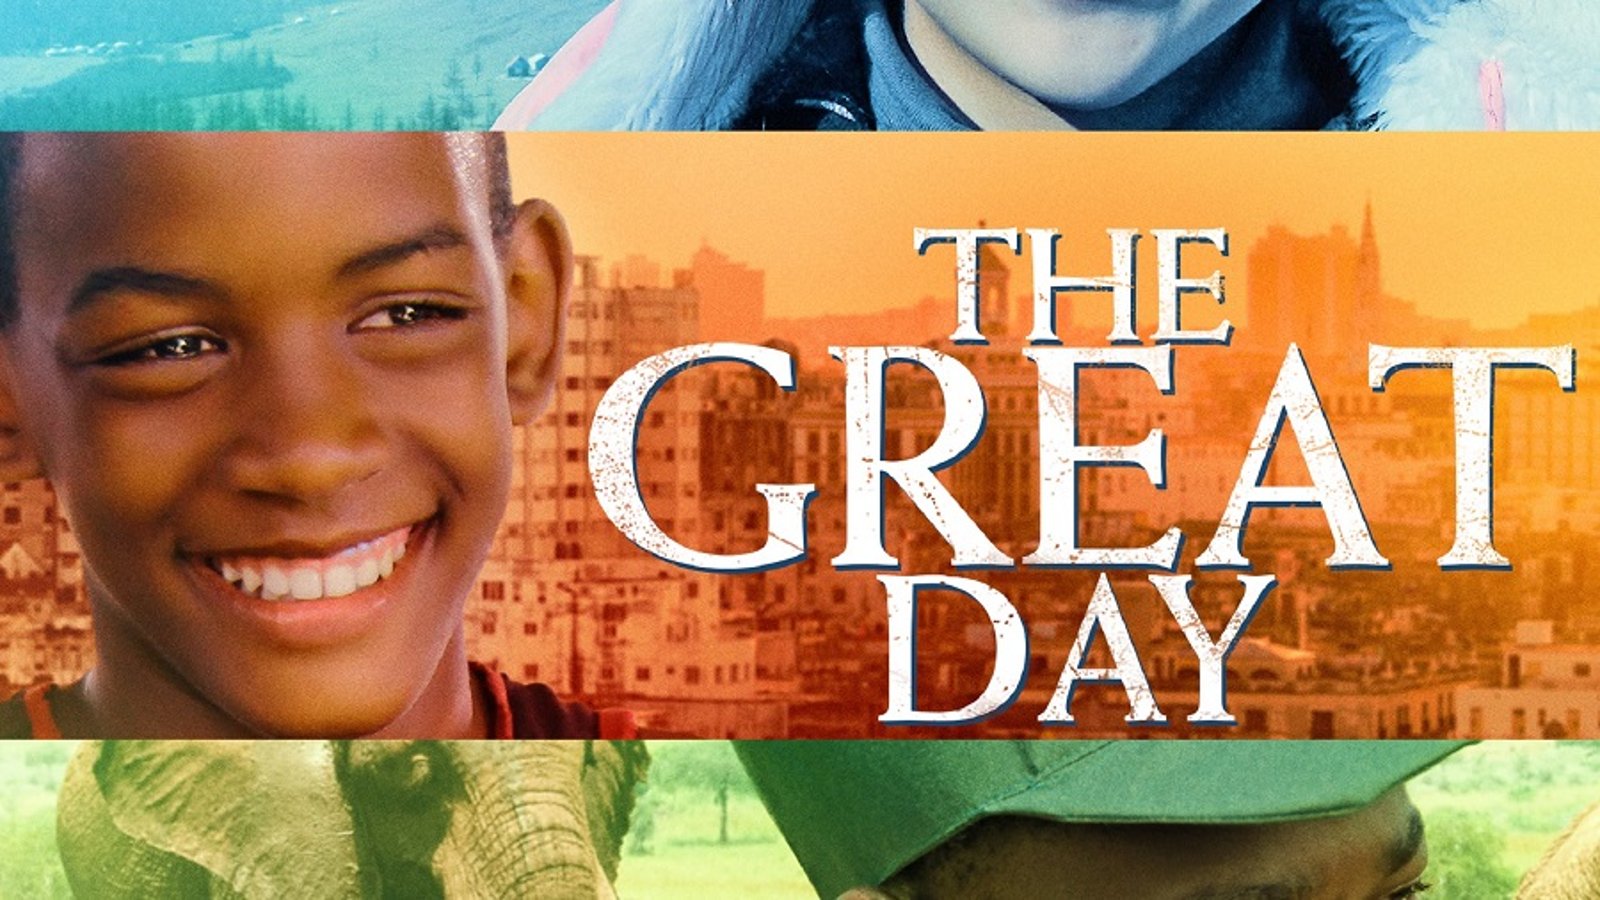 The Great Day - Four Young People Strive for a Brighter Future